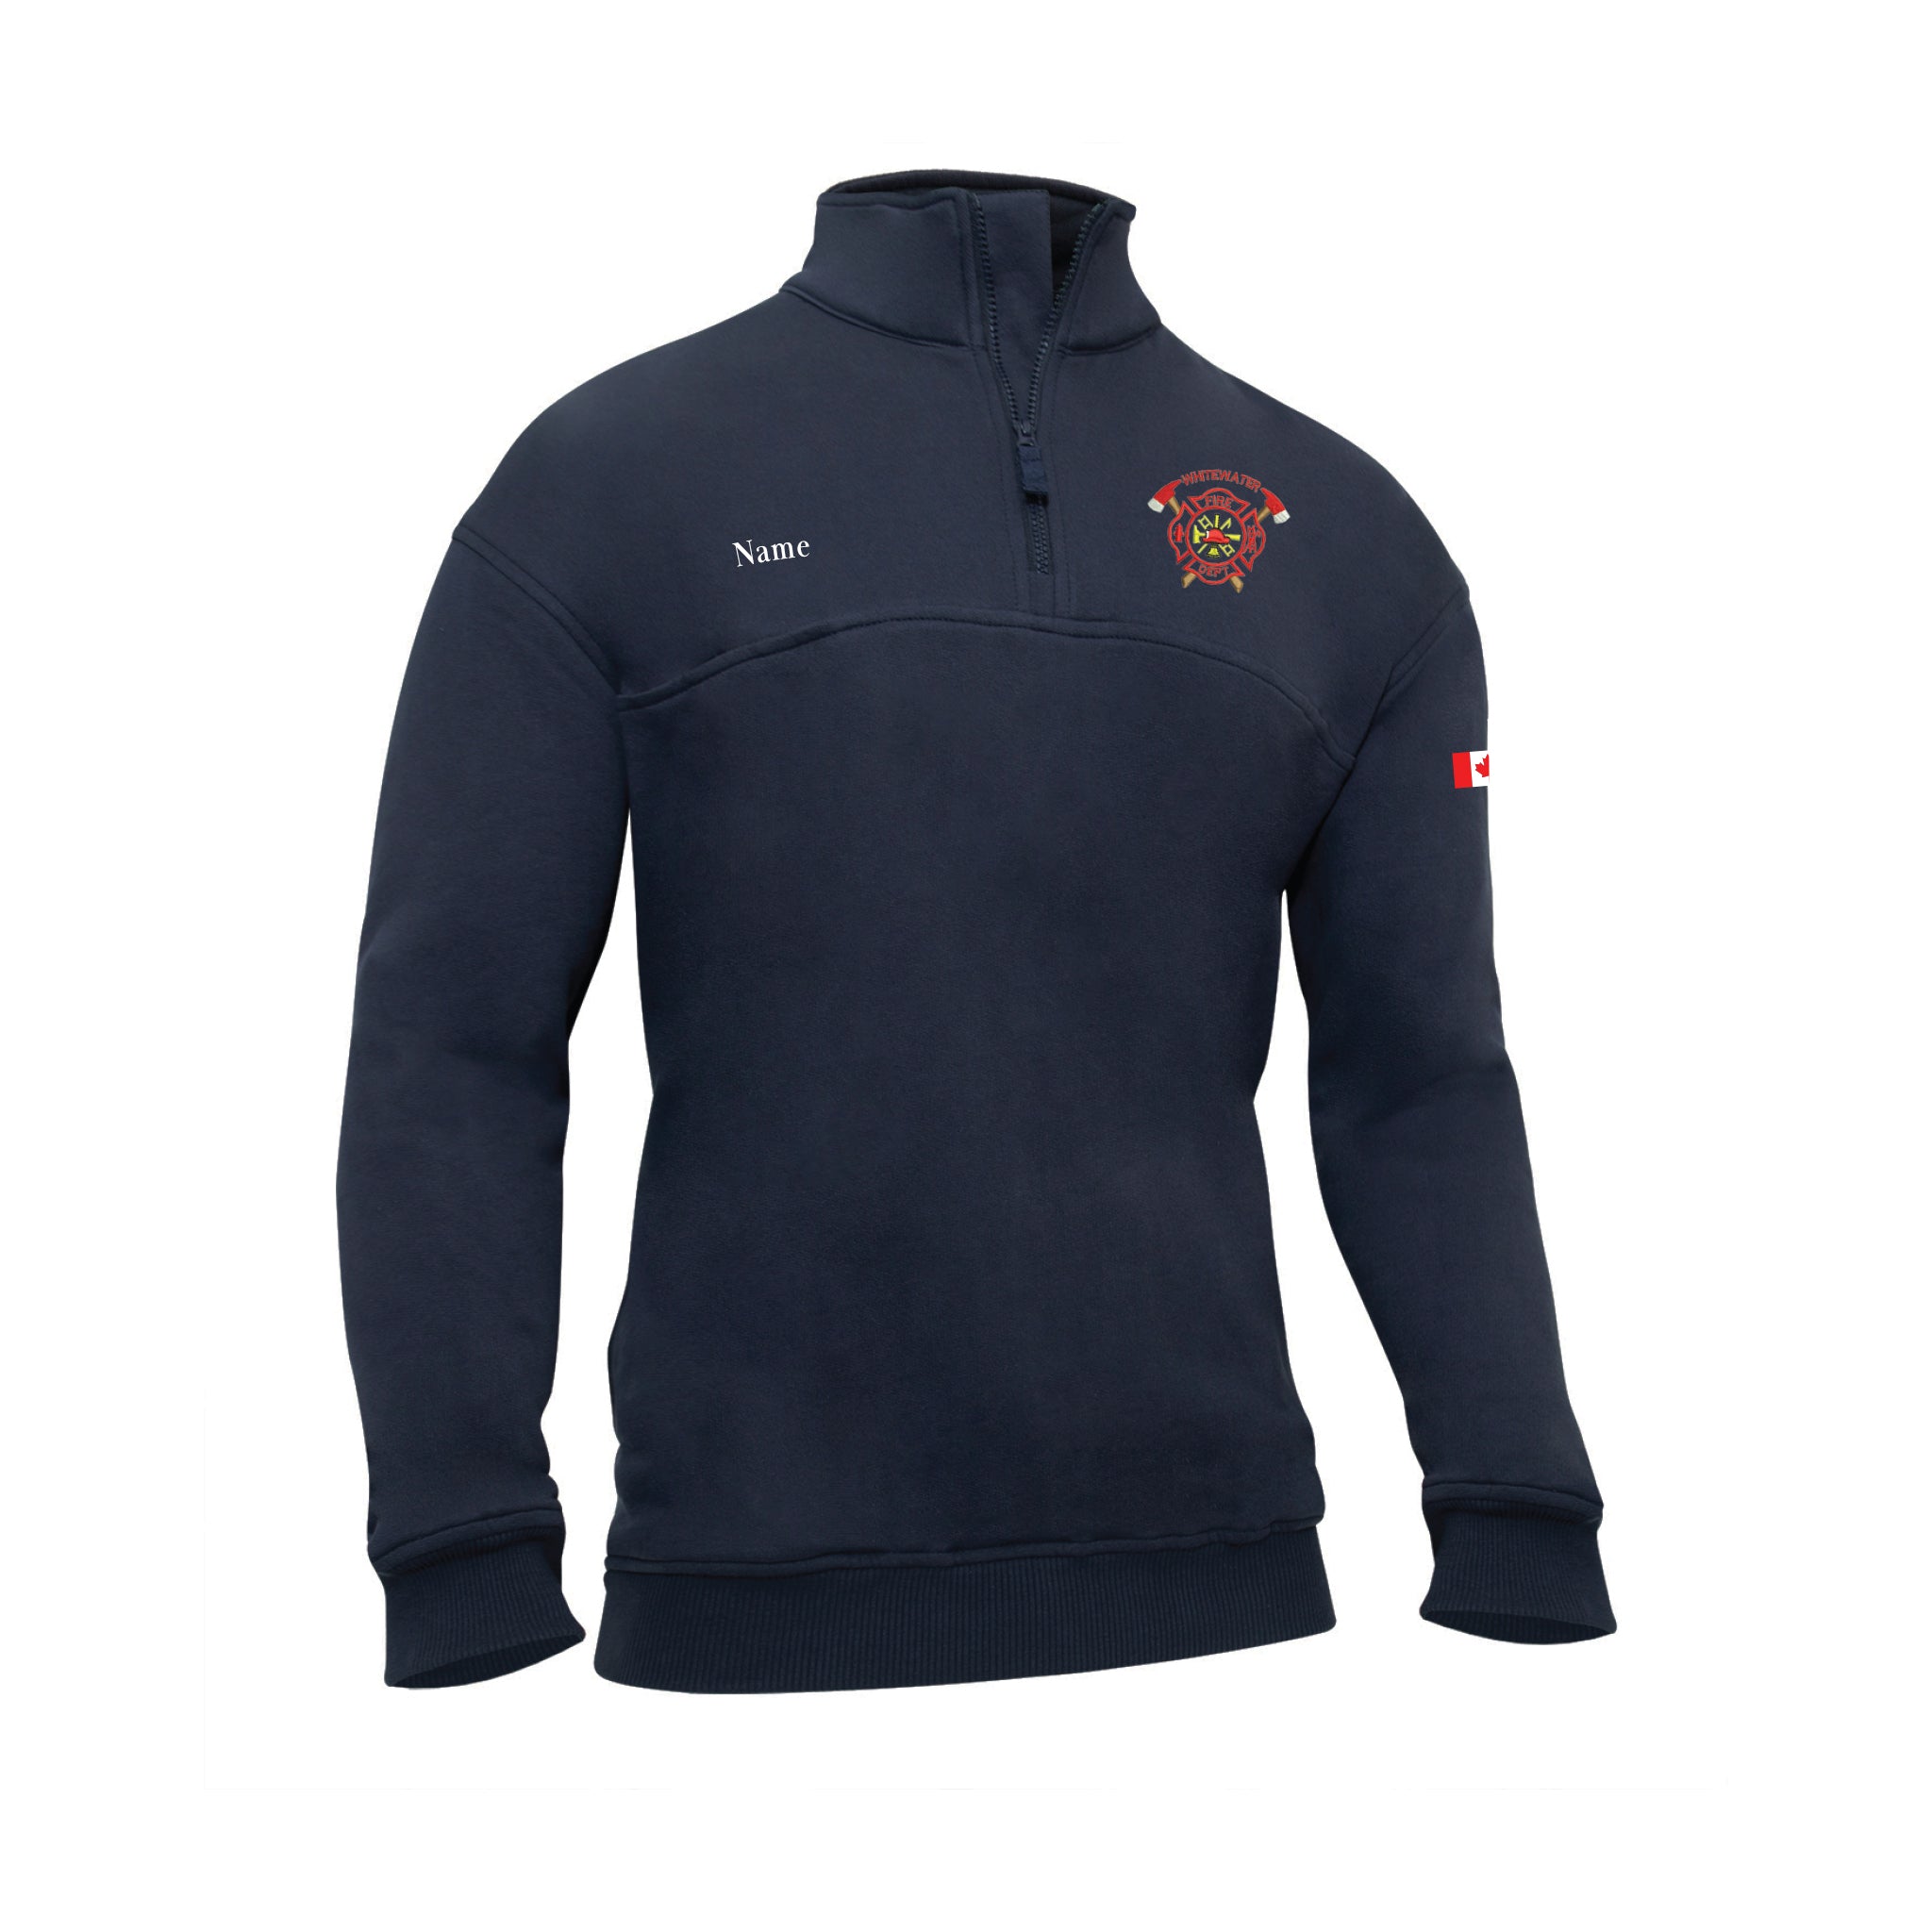 WWFD - Embroidered ¼ Zip Firefighter Workshirt